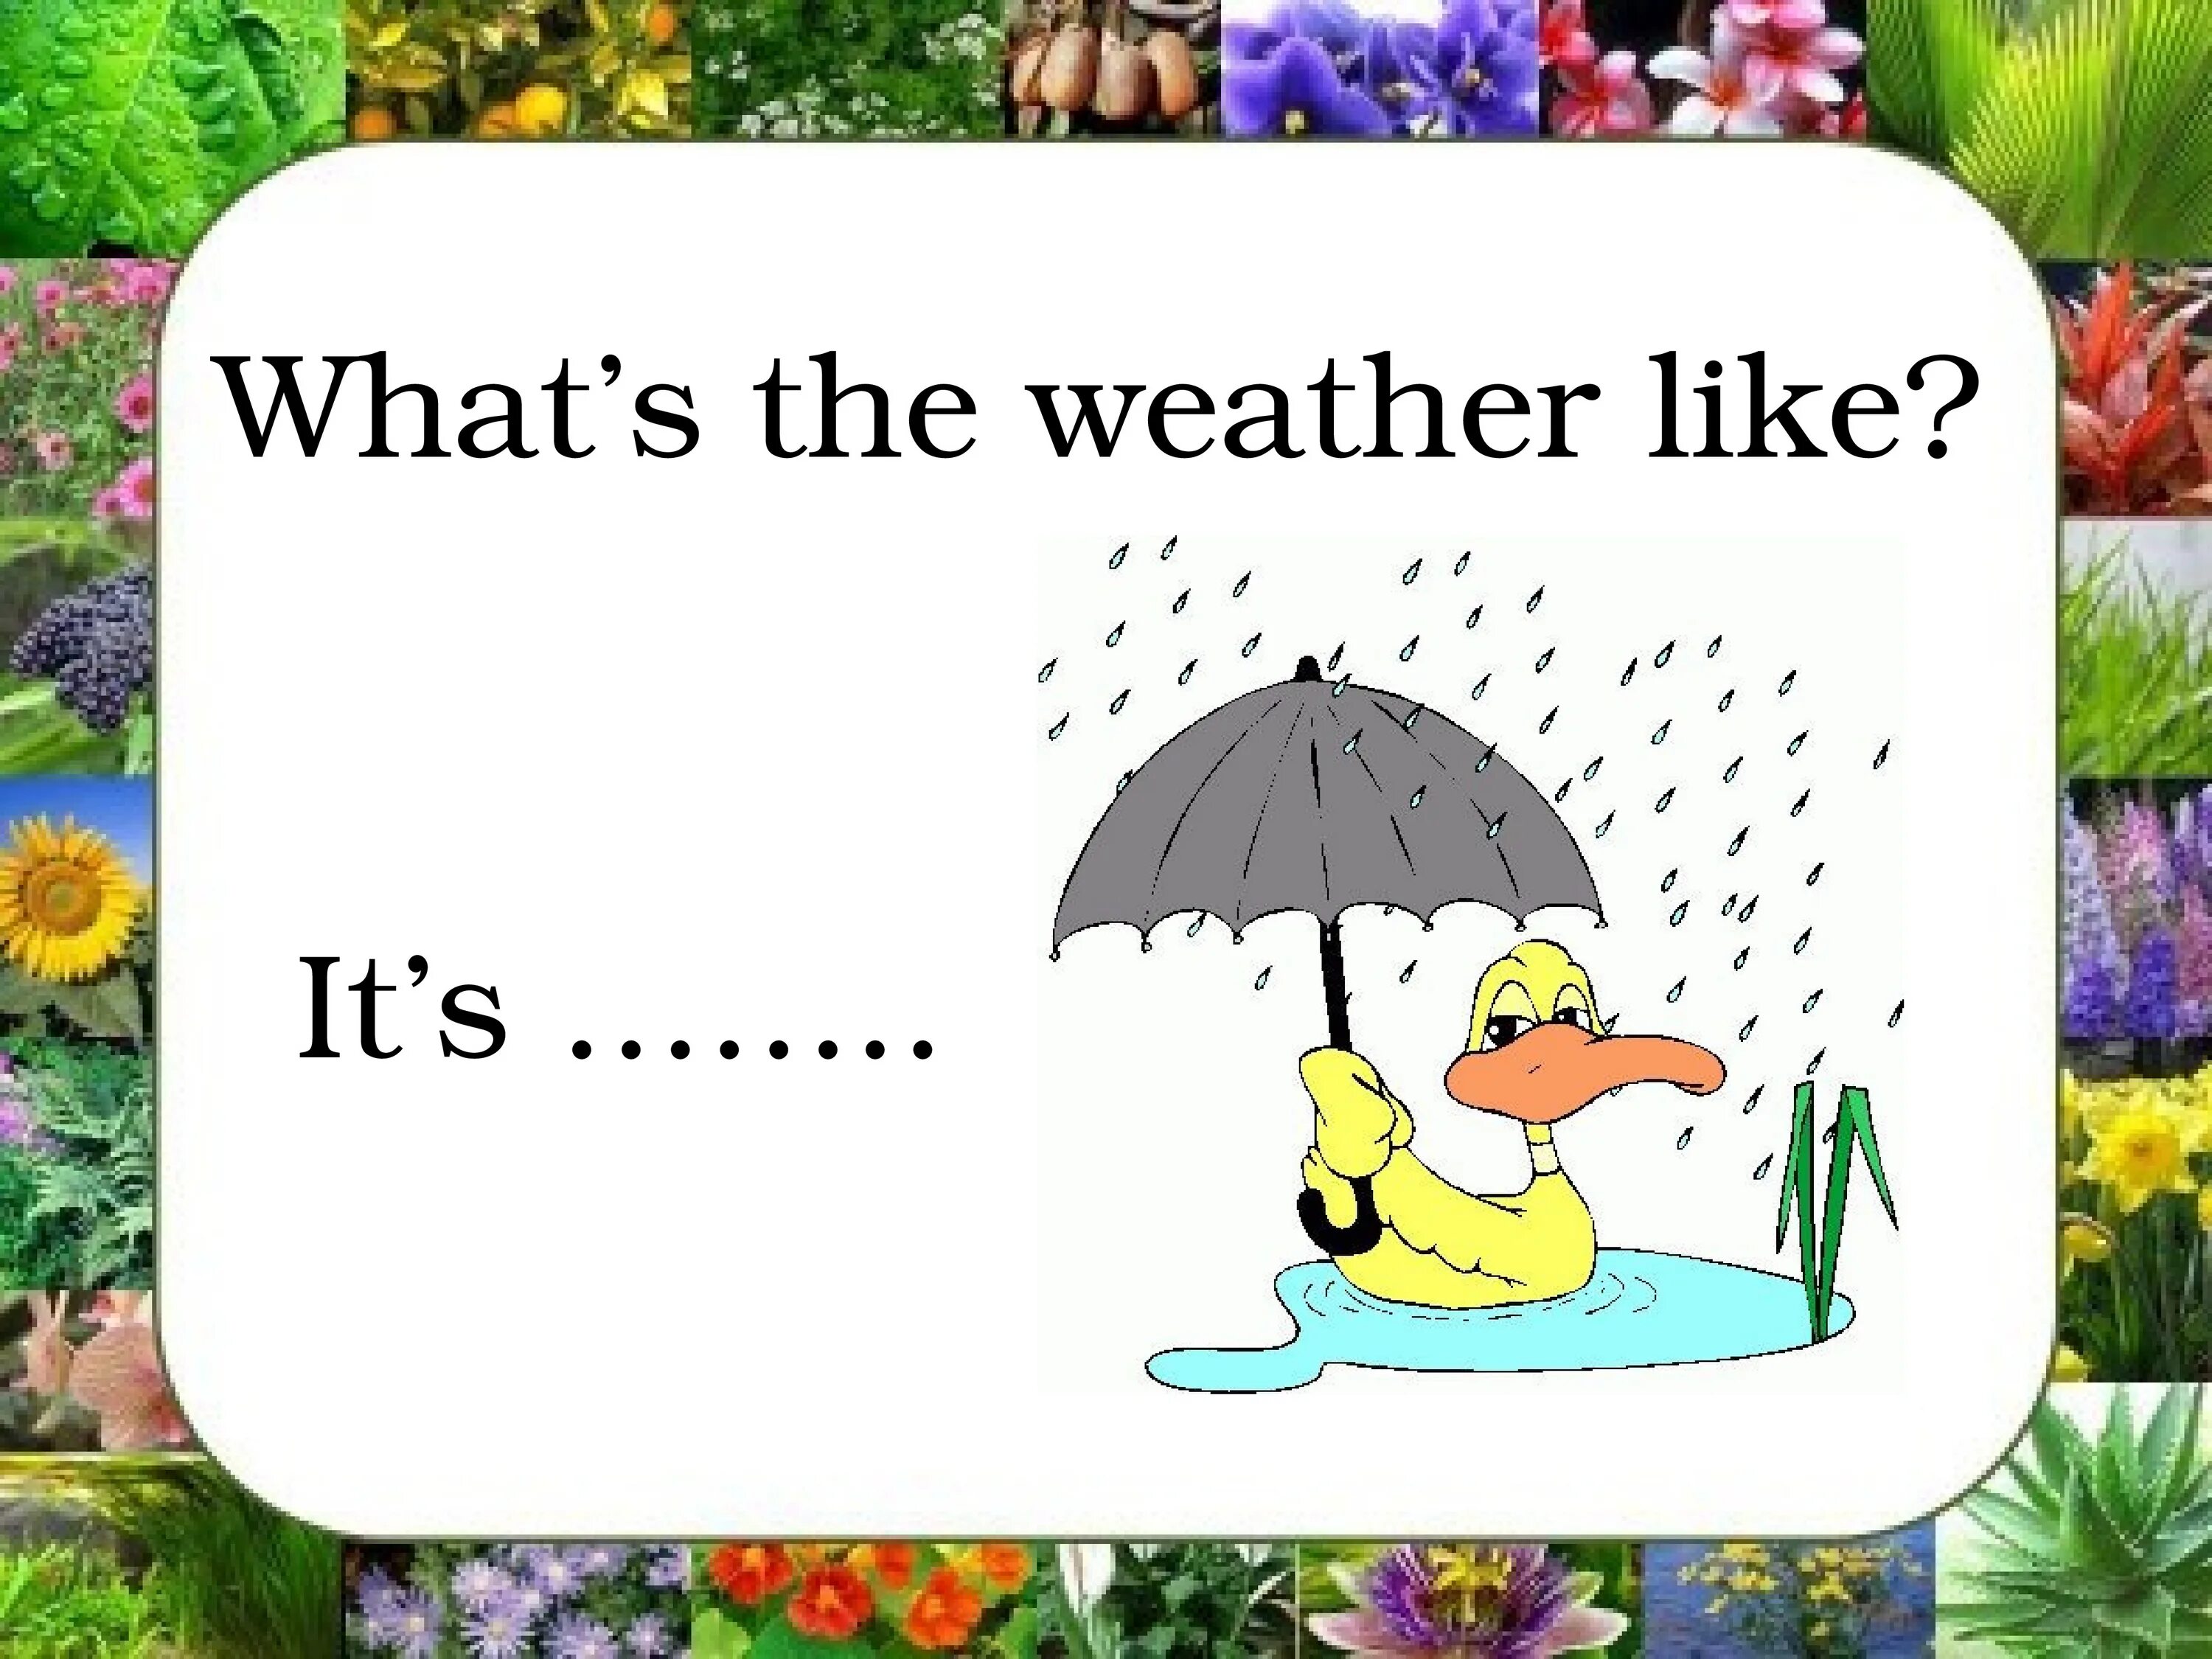 What s the weather song for kids. The weather 2 класс Spotlight. Weather 2 класс презентация. What's the weather like Spotlight 2 класс. Spotlight 2 погода.